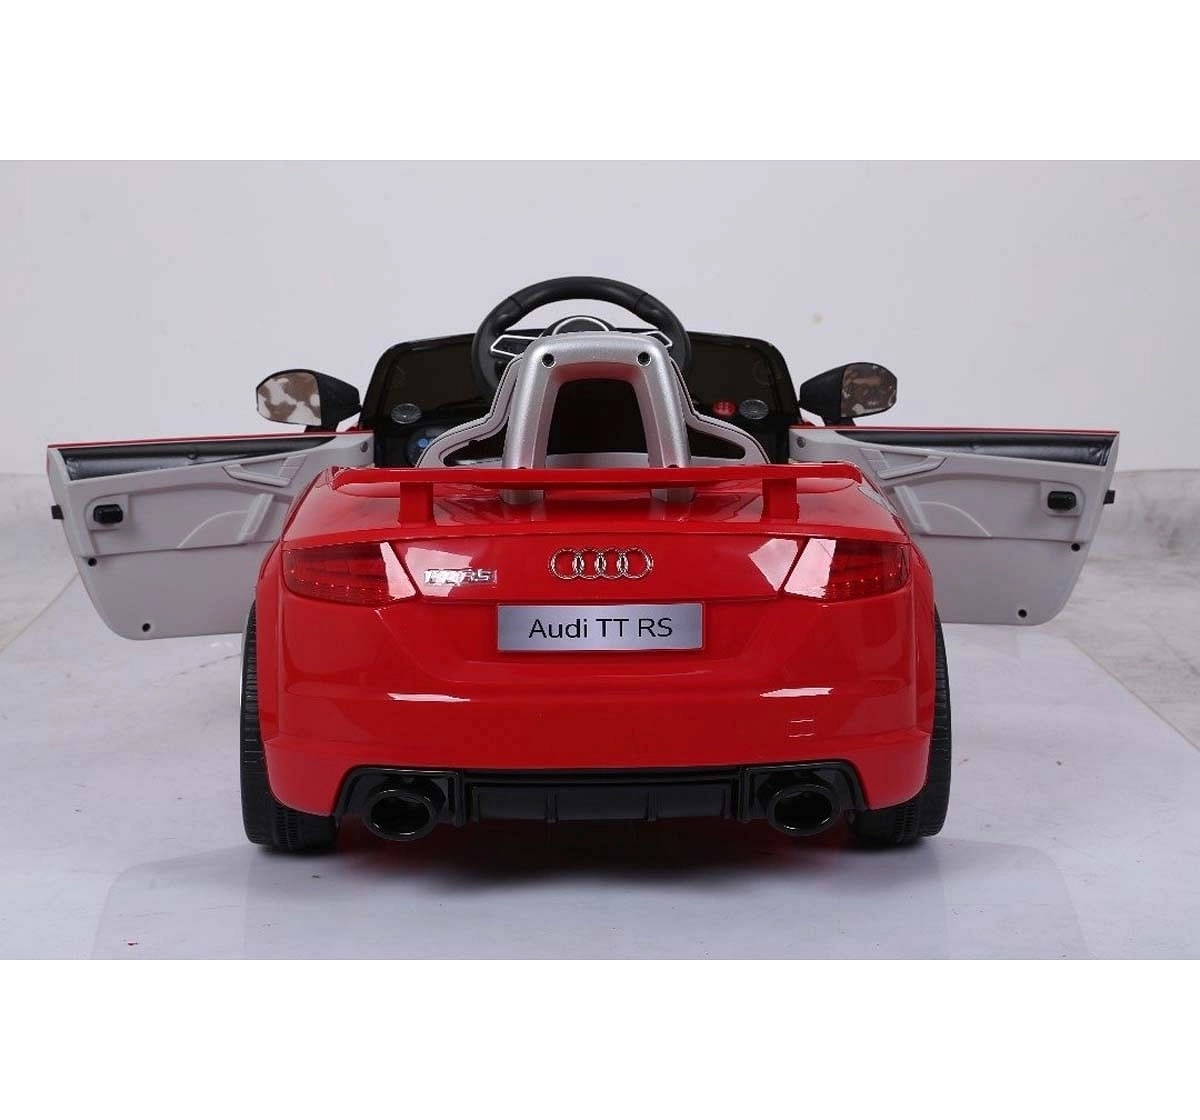 B:Wild Audi Tt Rs Ride-On Battery Operated Car Red Battery Operated Rideons for Kids Age 3Y+ (Red)